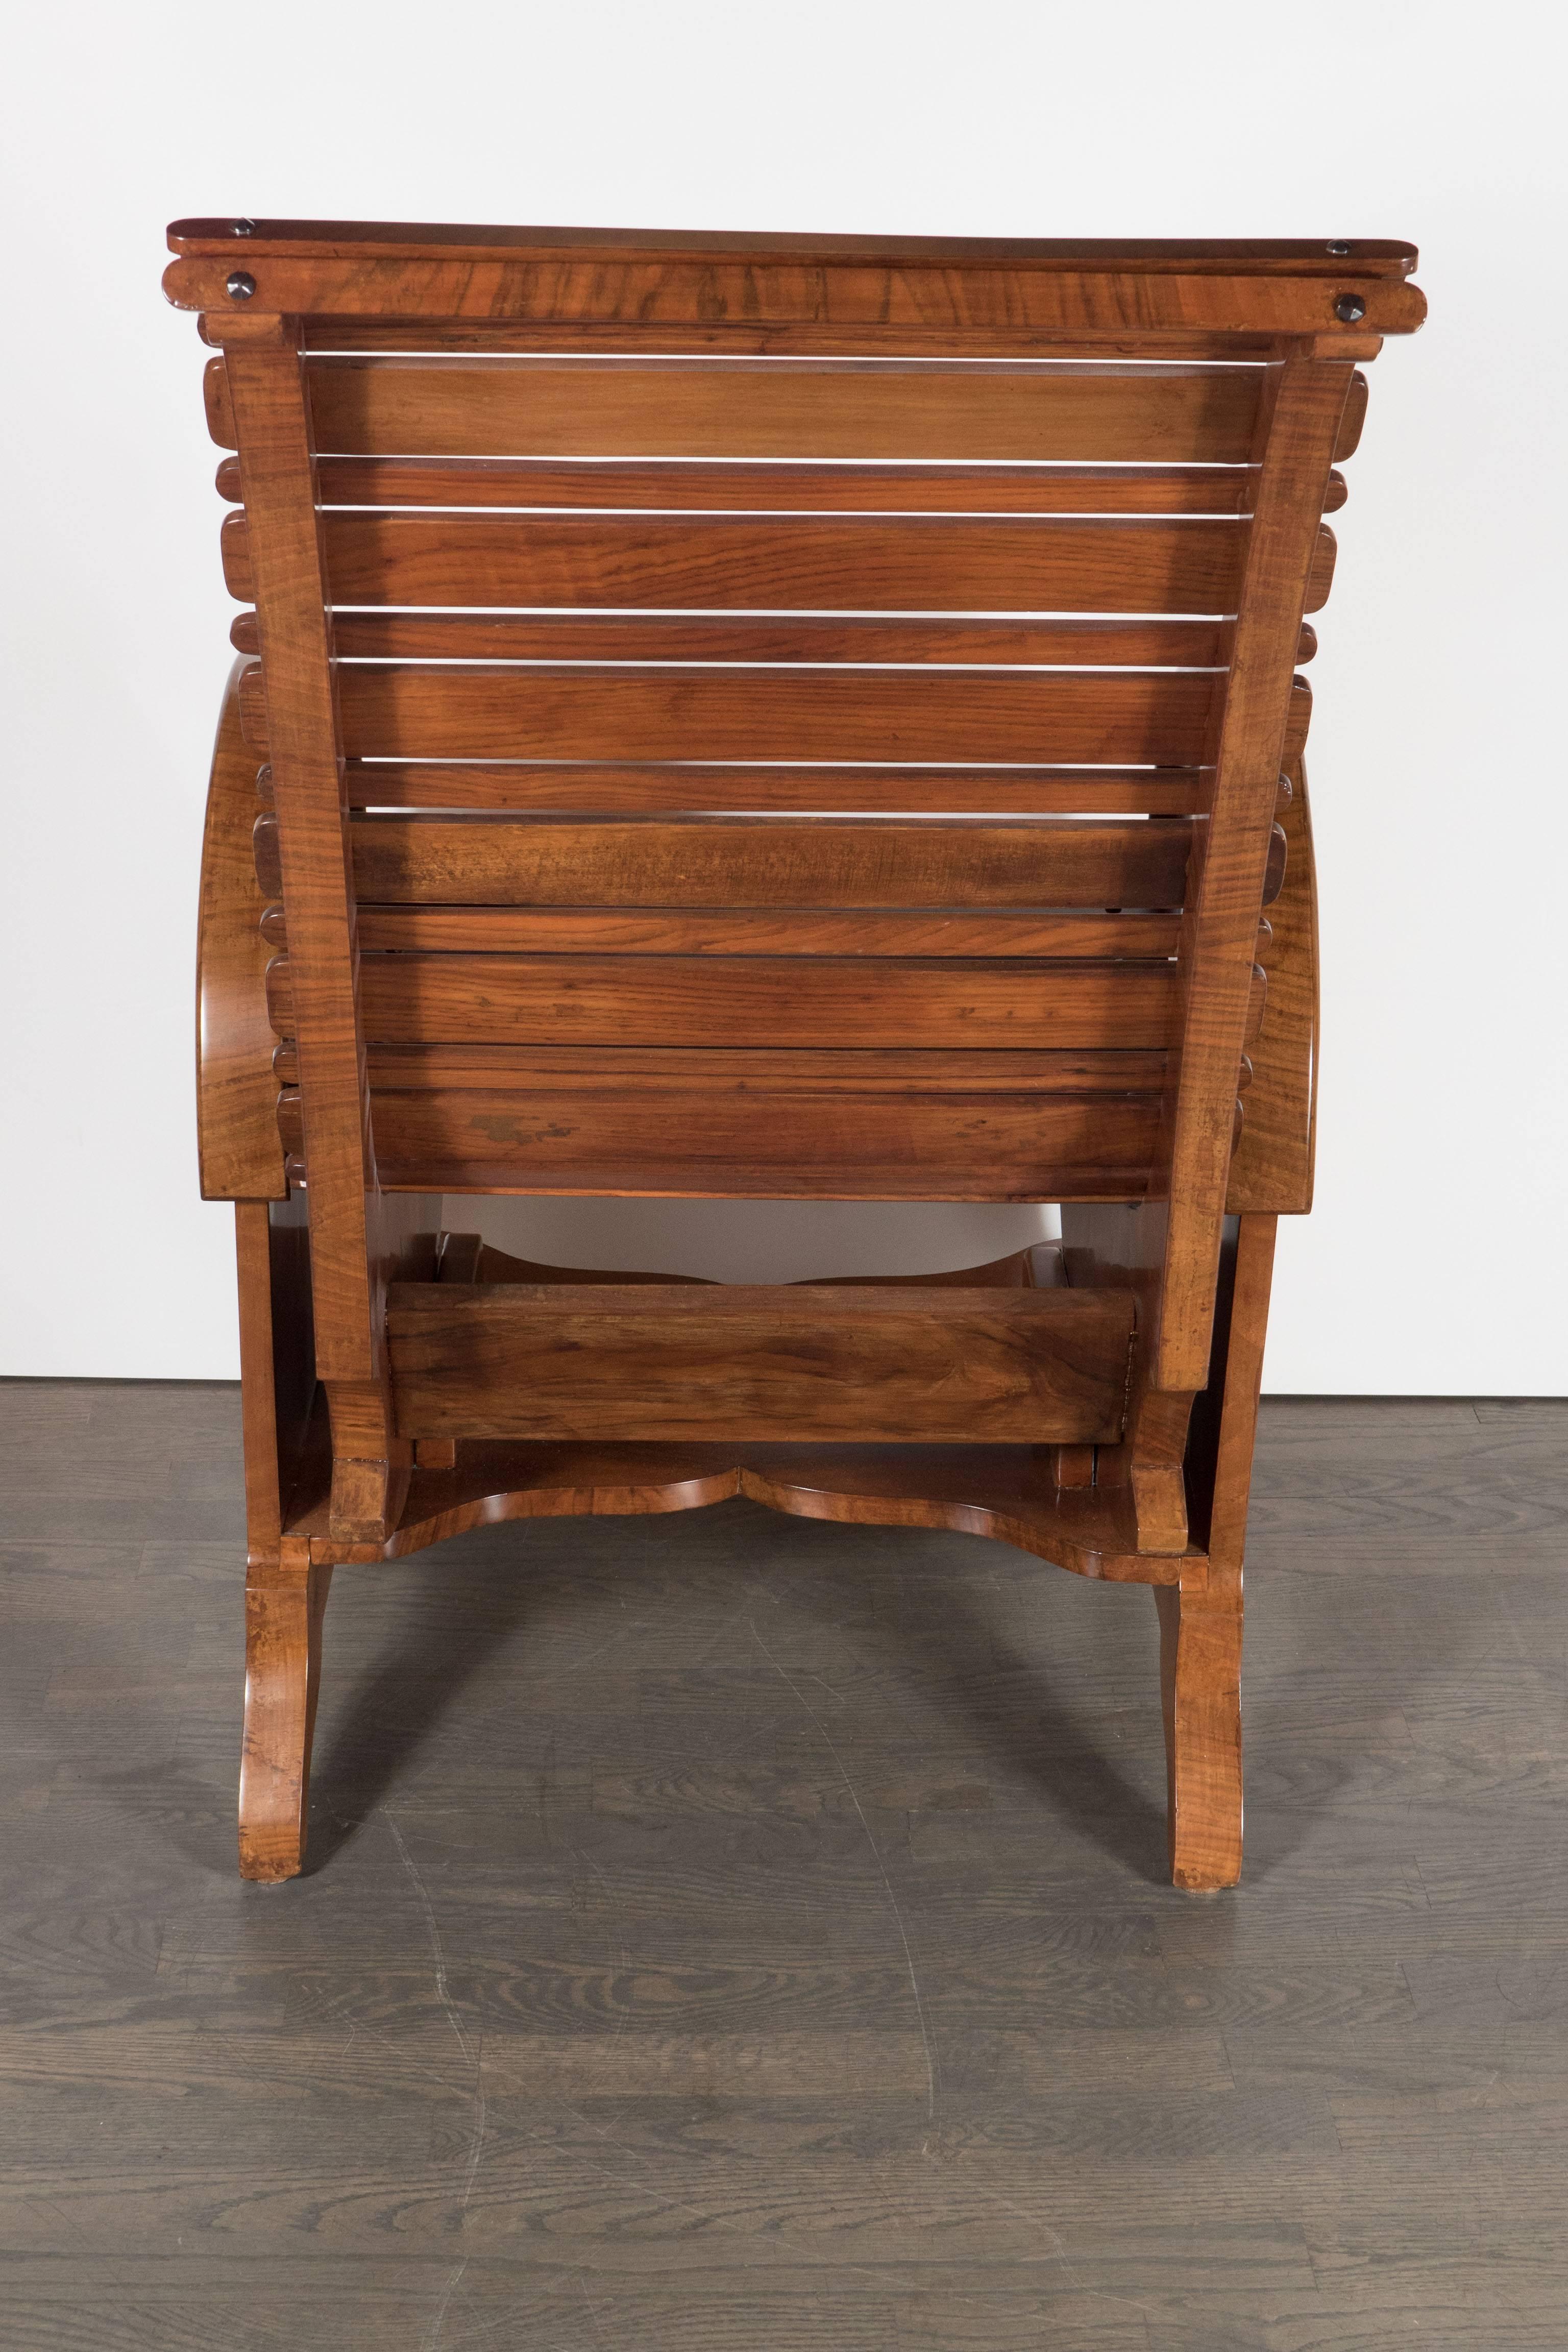 French Art Deco Bookmatched Burled Walnut Adjustable Chair with Slatted Design 1